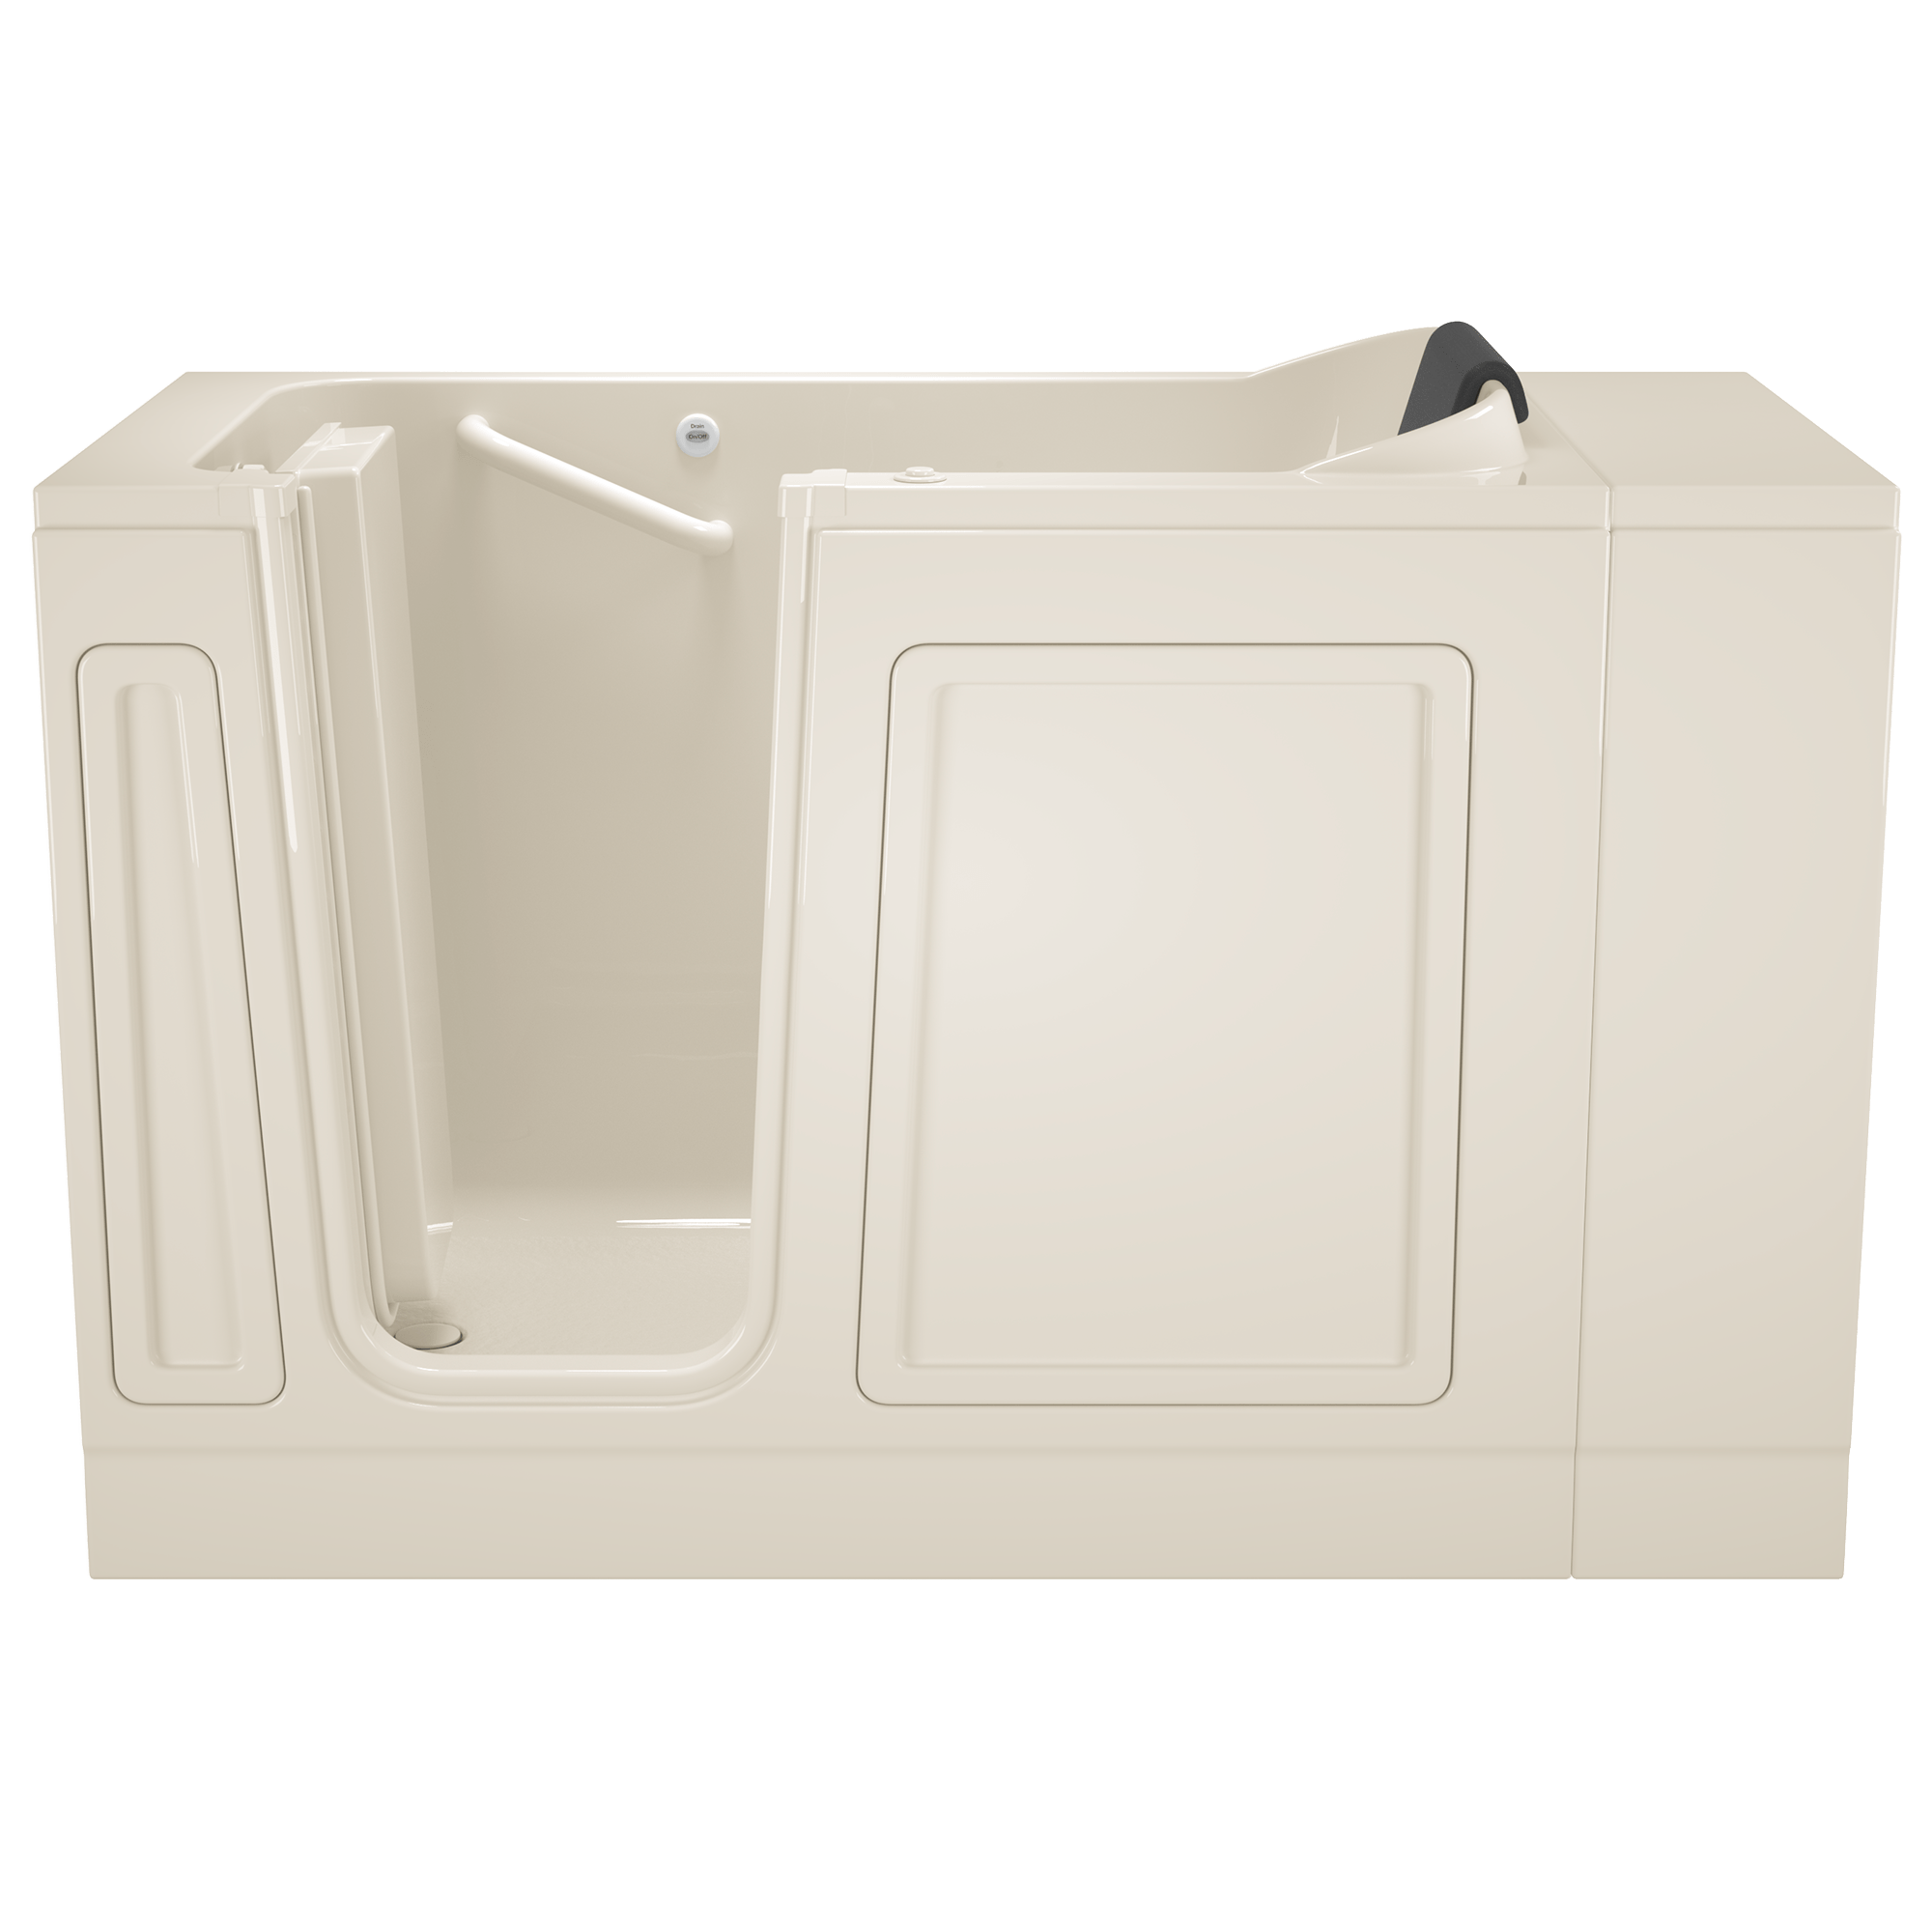 Acrylic Luxury Series 28 x 48 Inch Walk in Tub With Air Spa System   Left Hand Drain WIB LINEN